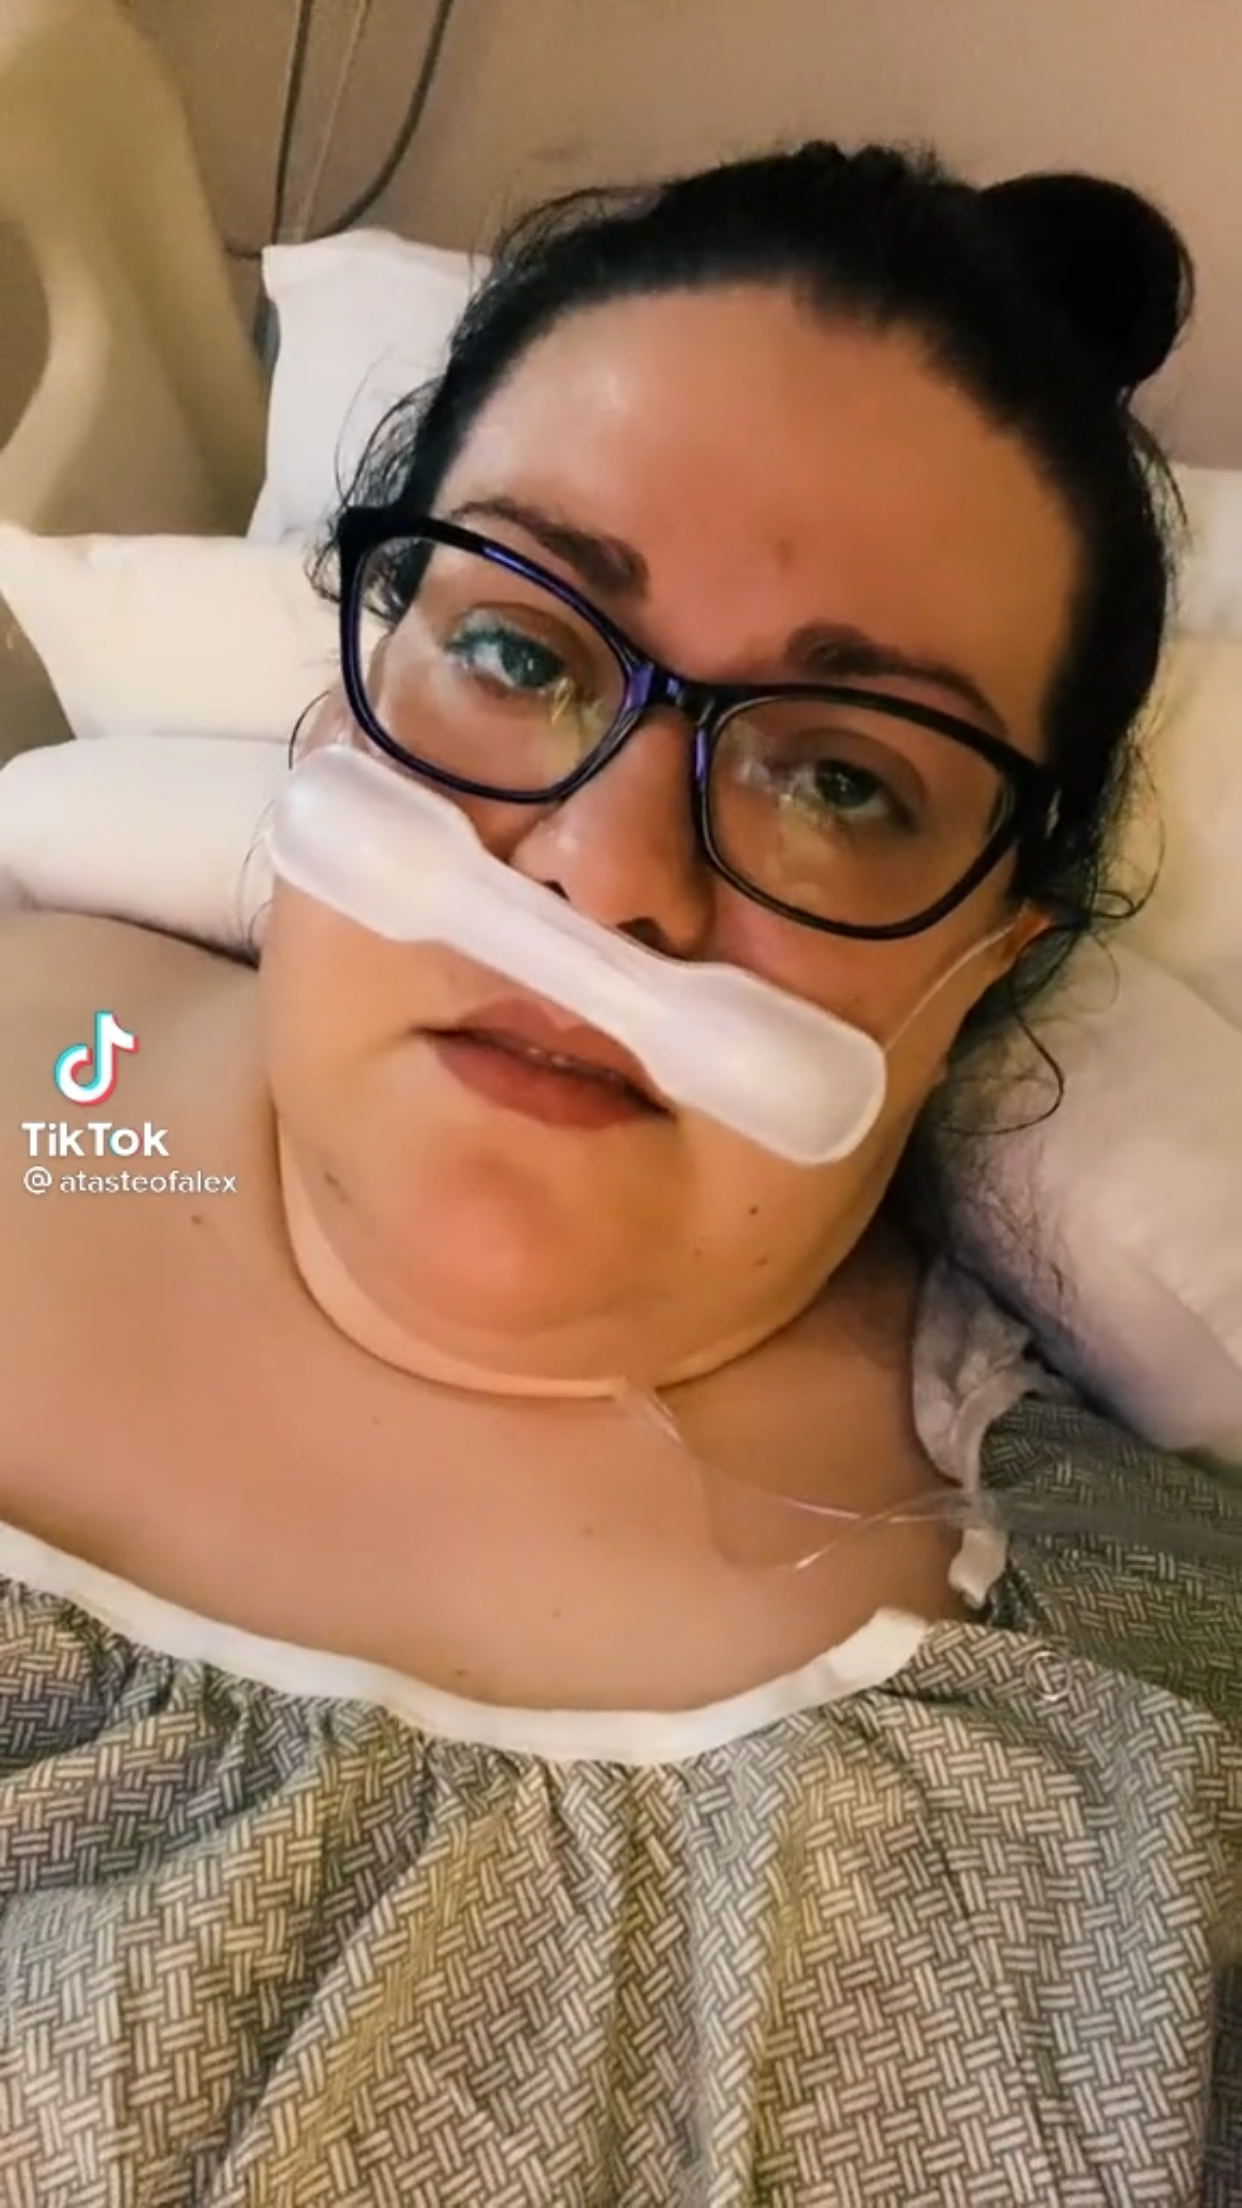 Megan Alexandra Blankenbiller from her hospital bed, encouraging others to get vaccinated before passing away from Covid-19